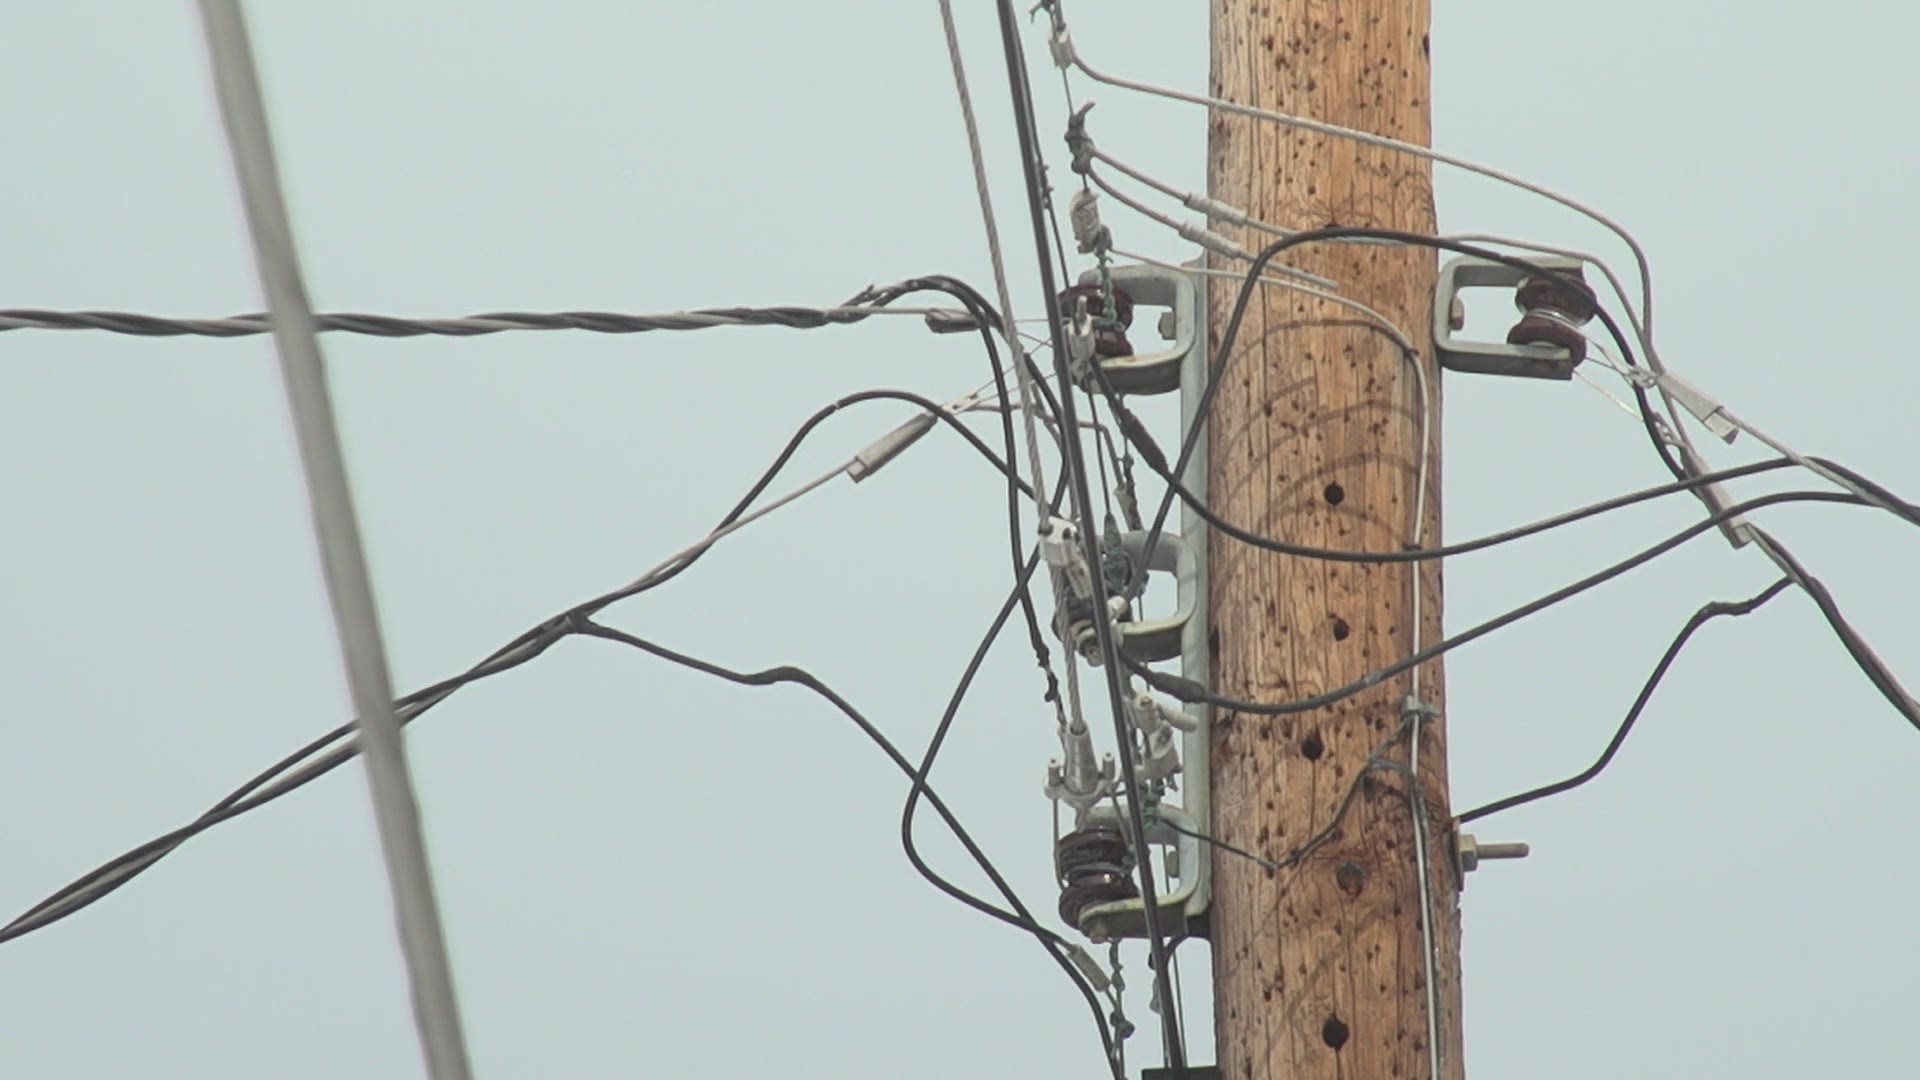 Skyrocketing electricity bills | Will Texans be forced to pay them?